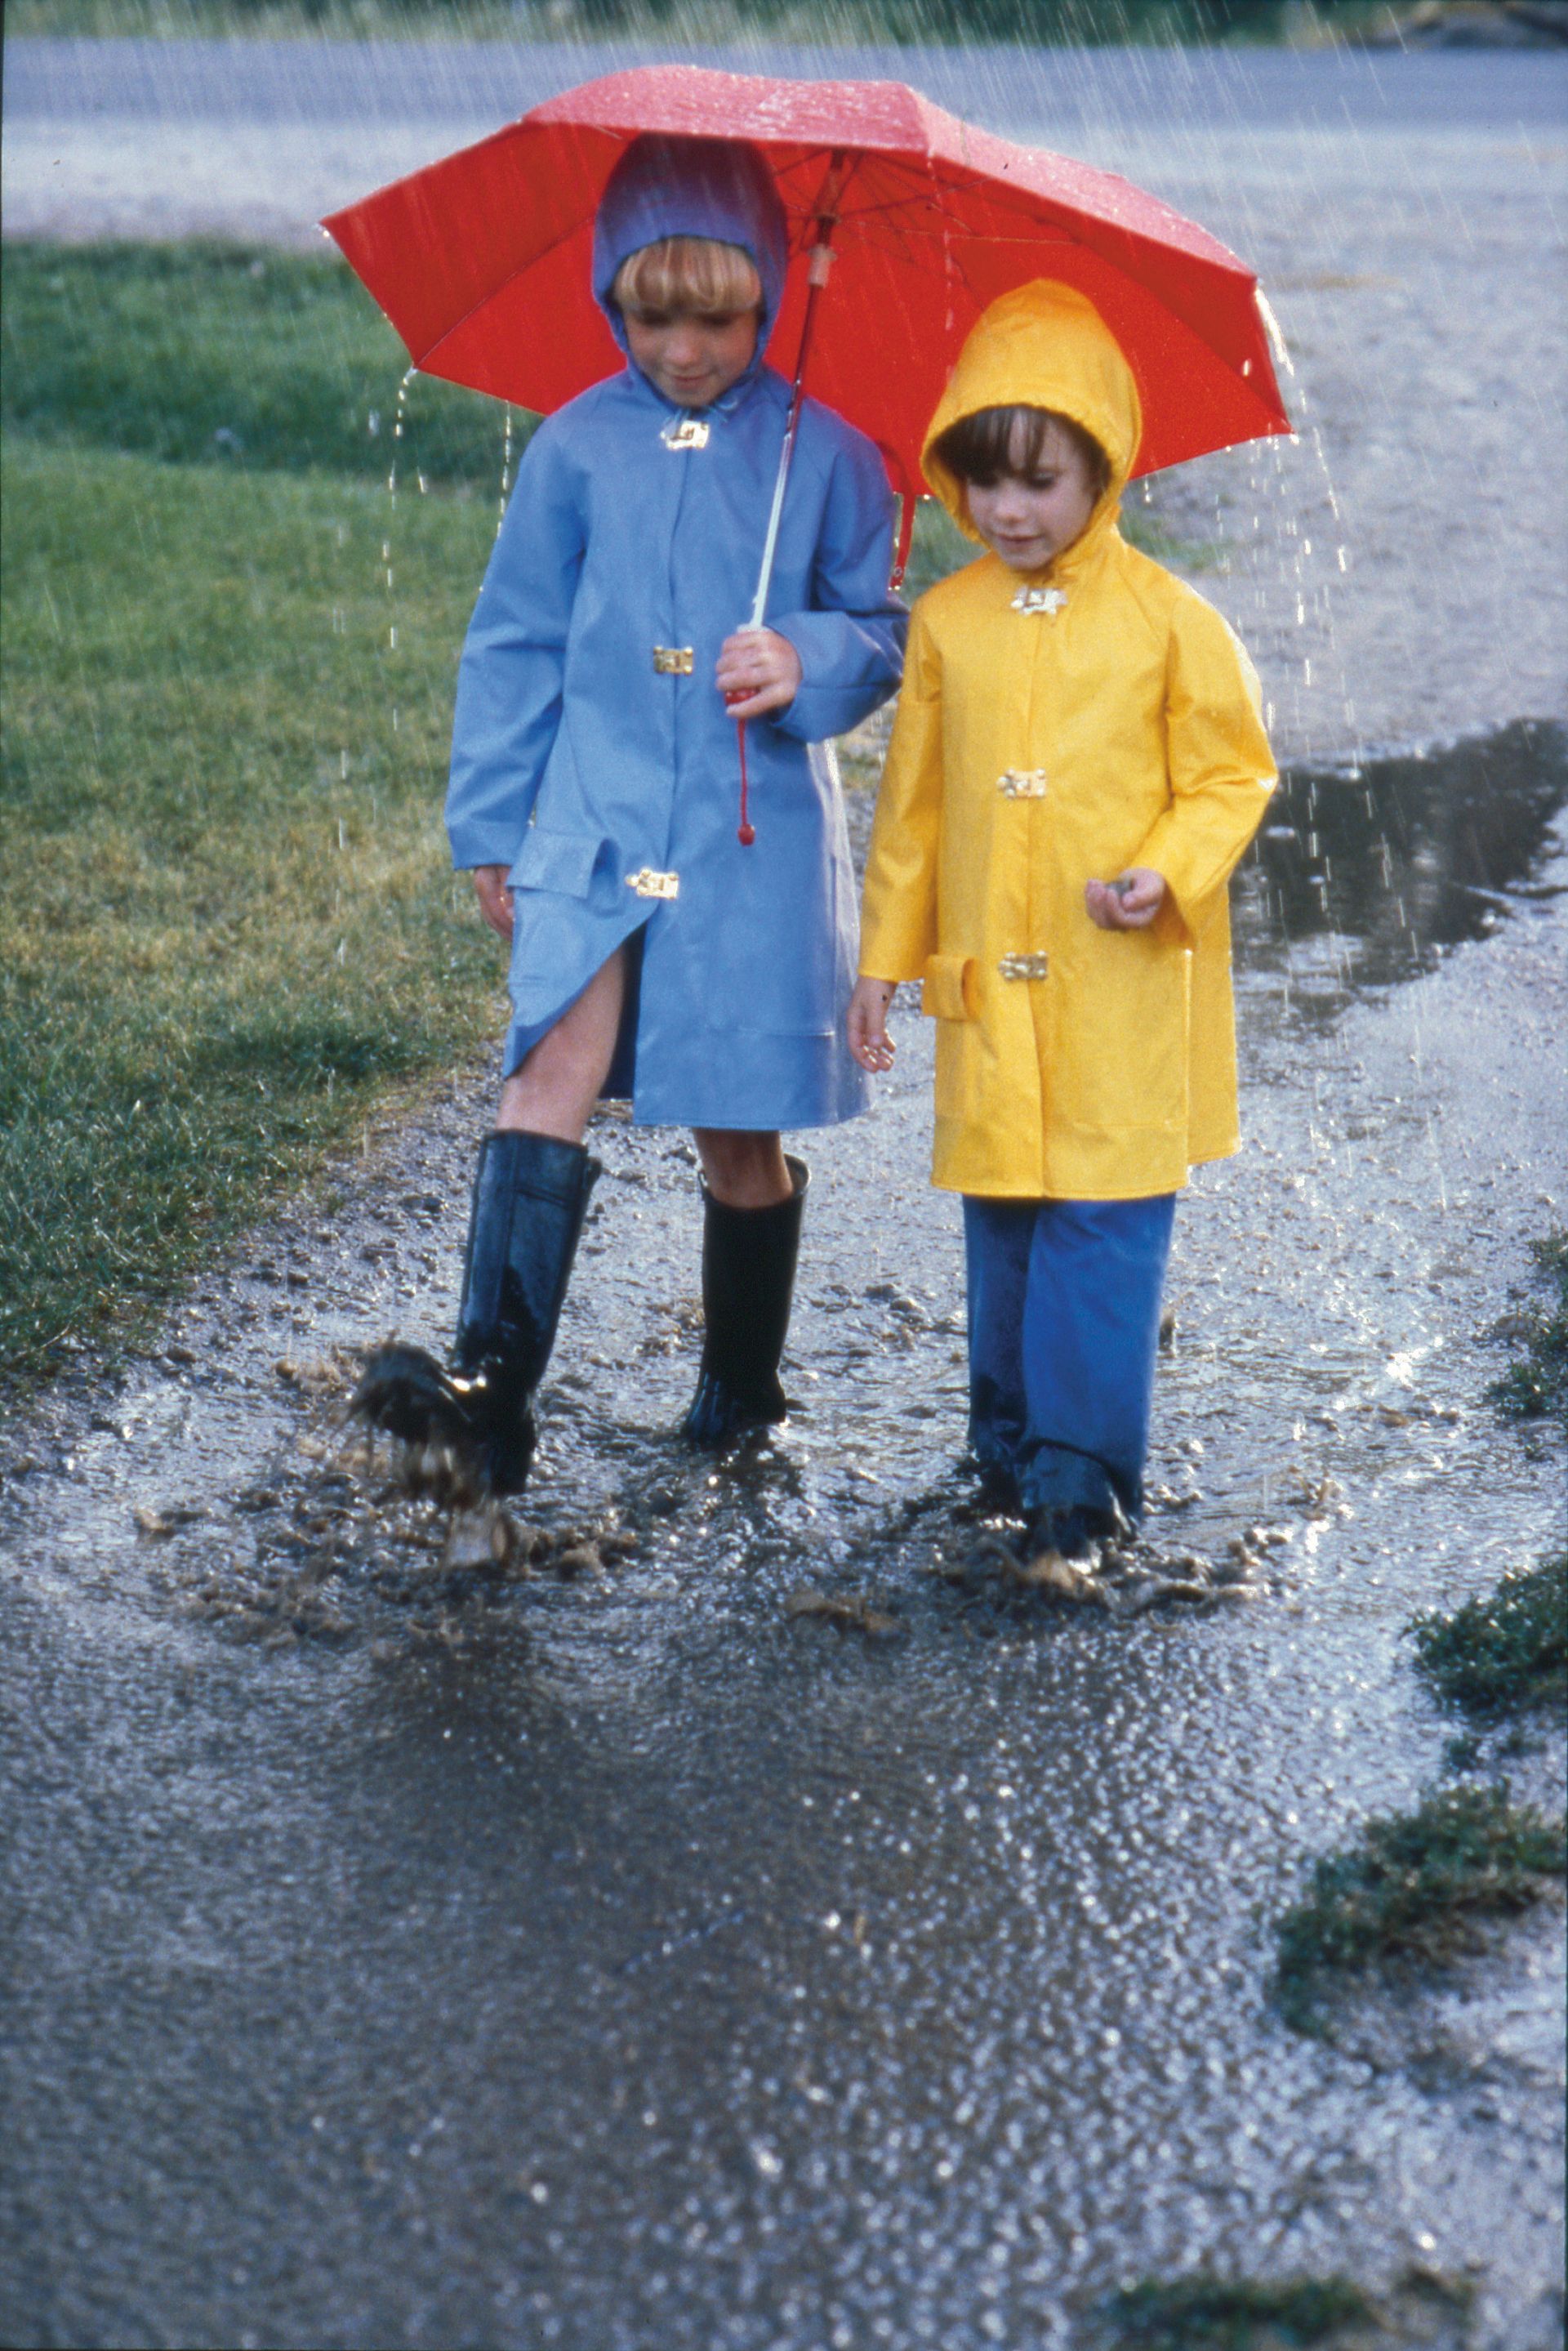 Two children playing together in the rain.